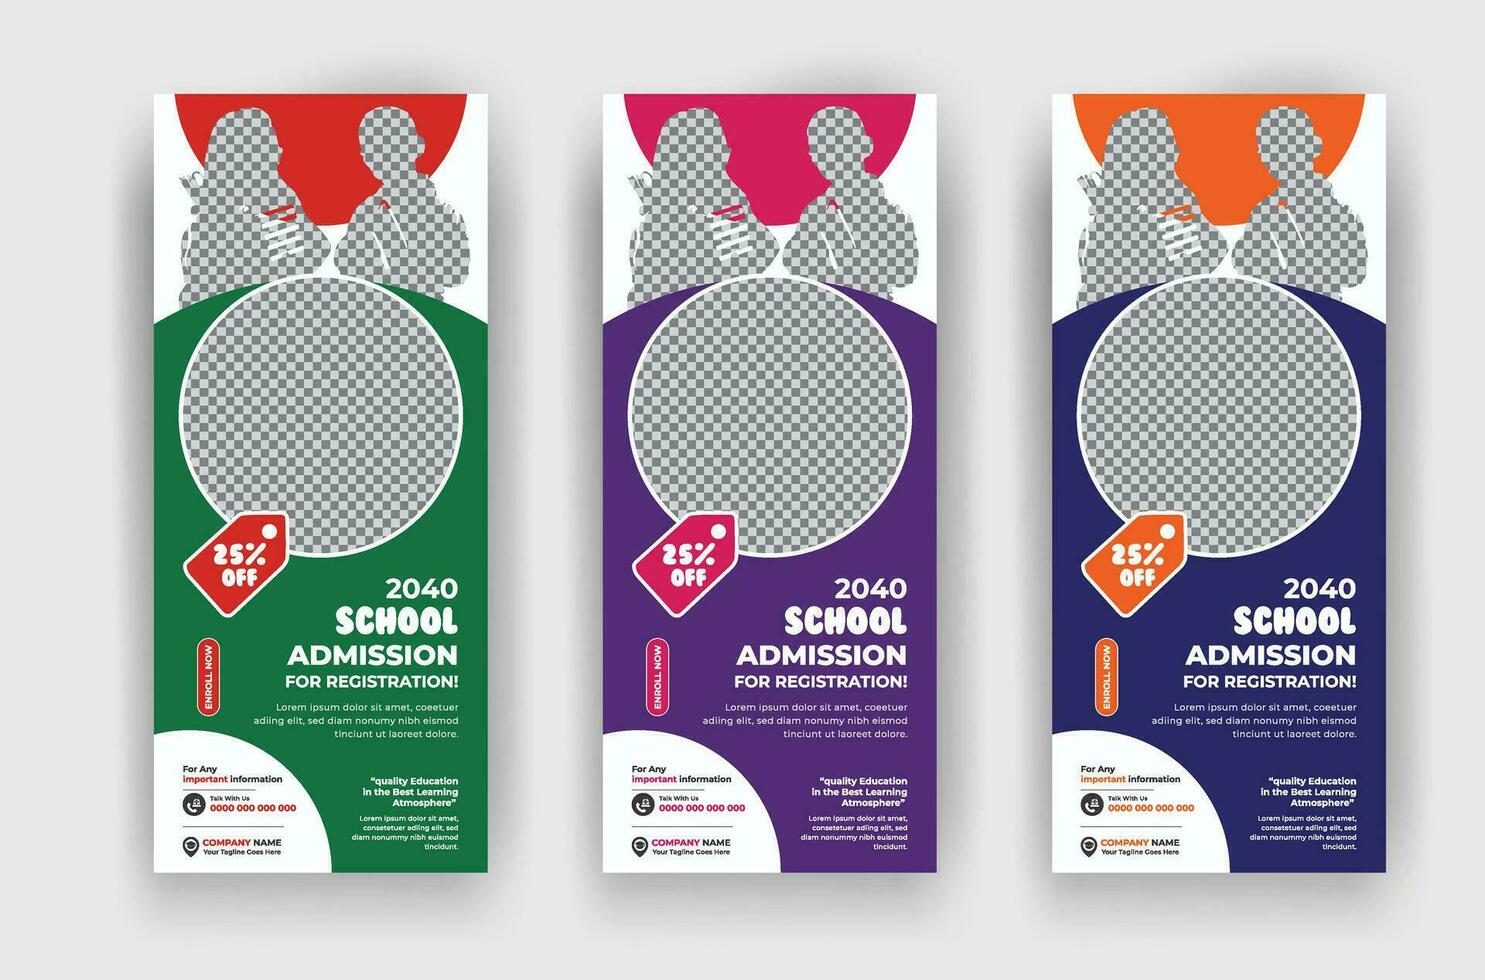 School admission registration study roll up banner template vector